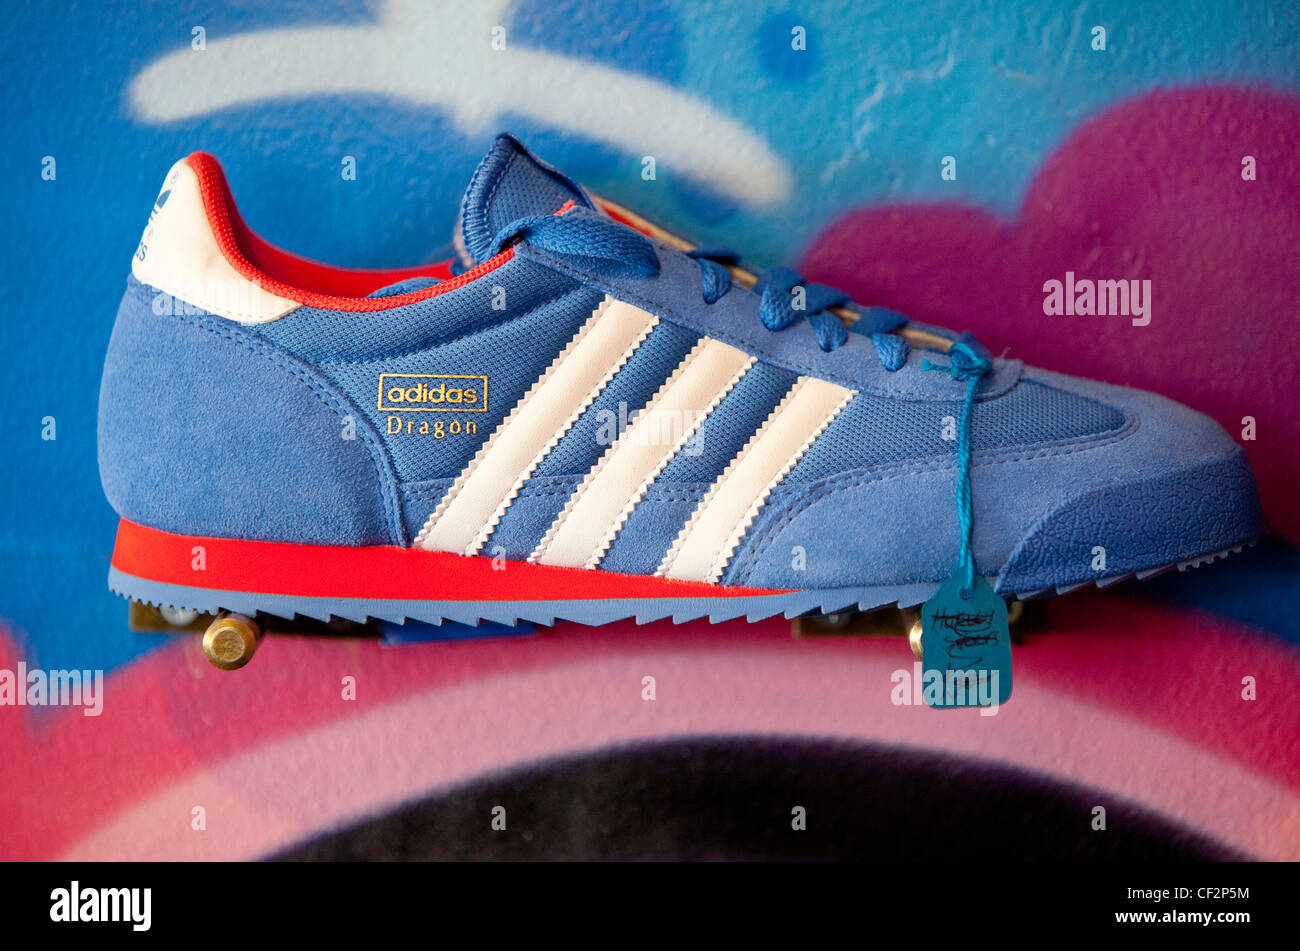 item surfen geest Adidas trainer in display for sale Stock Photo - Alamy